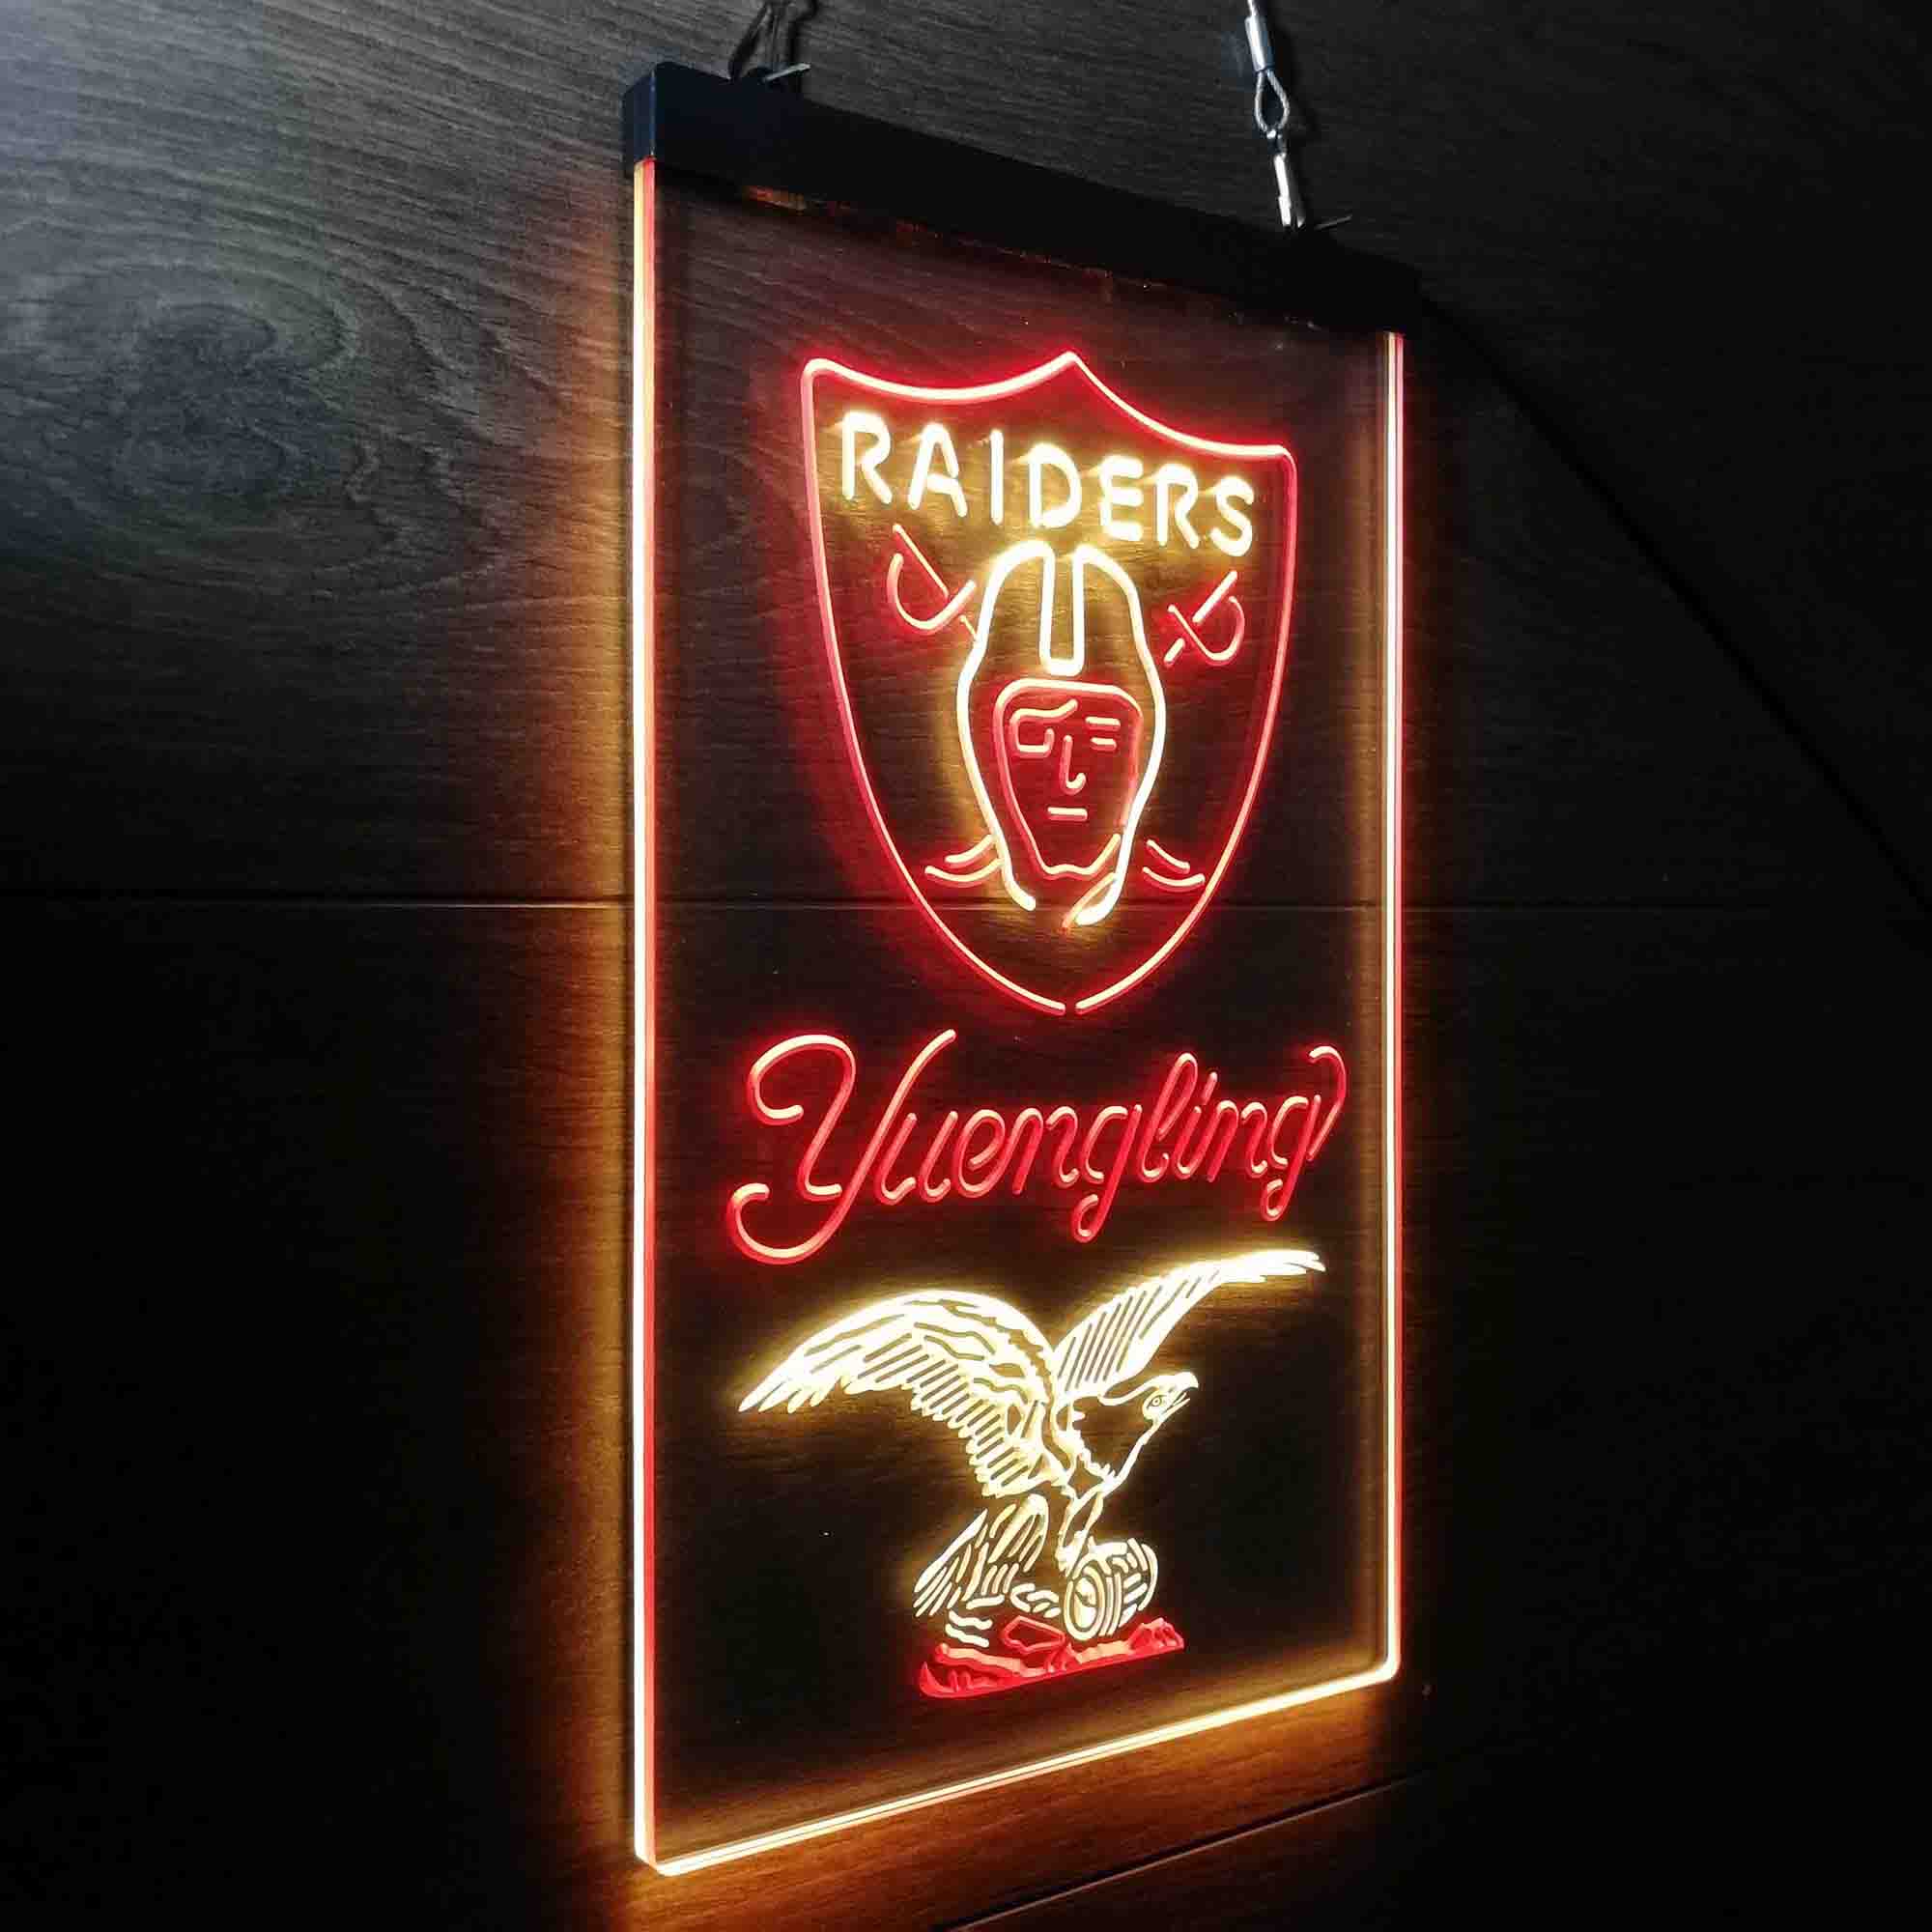 Yuengling Bar Oakland Raiders Est. 1960 LED Neon Sign